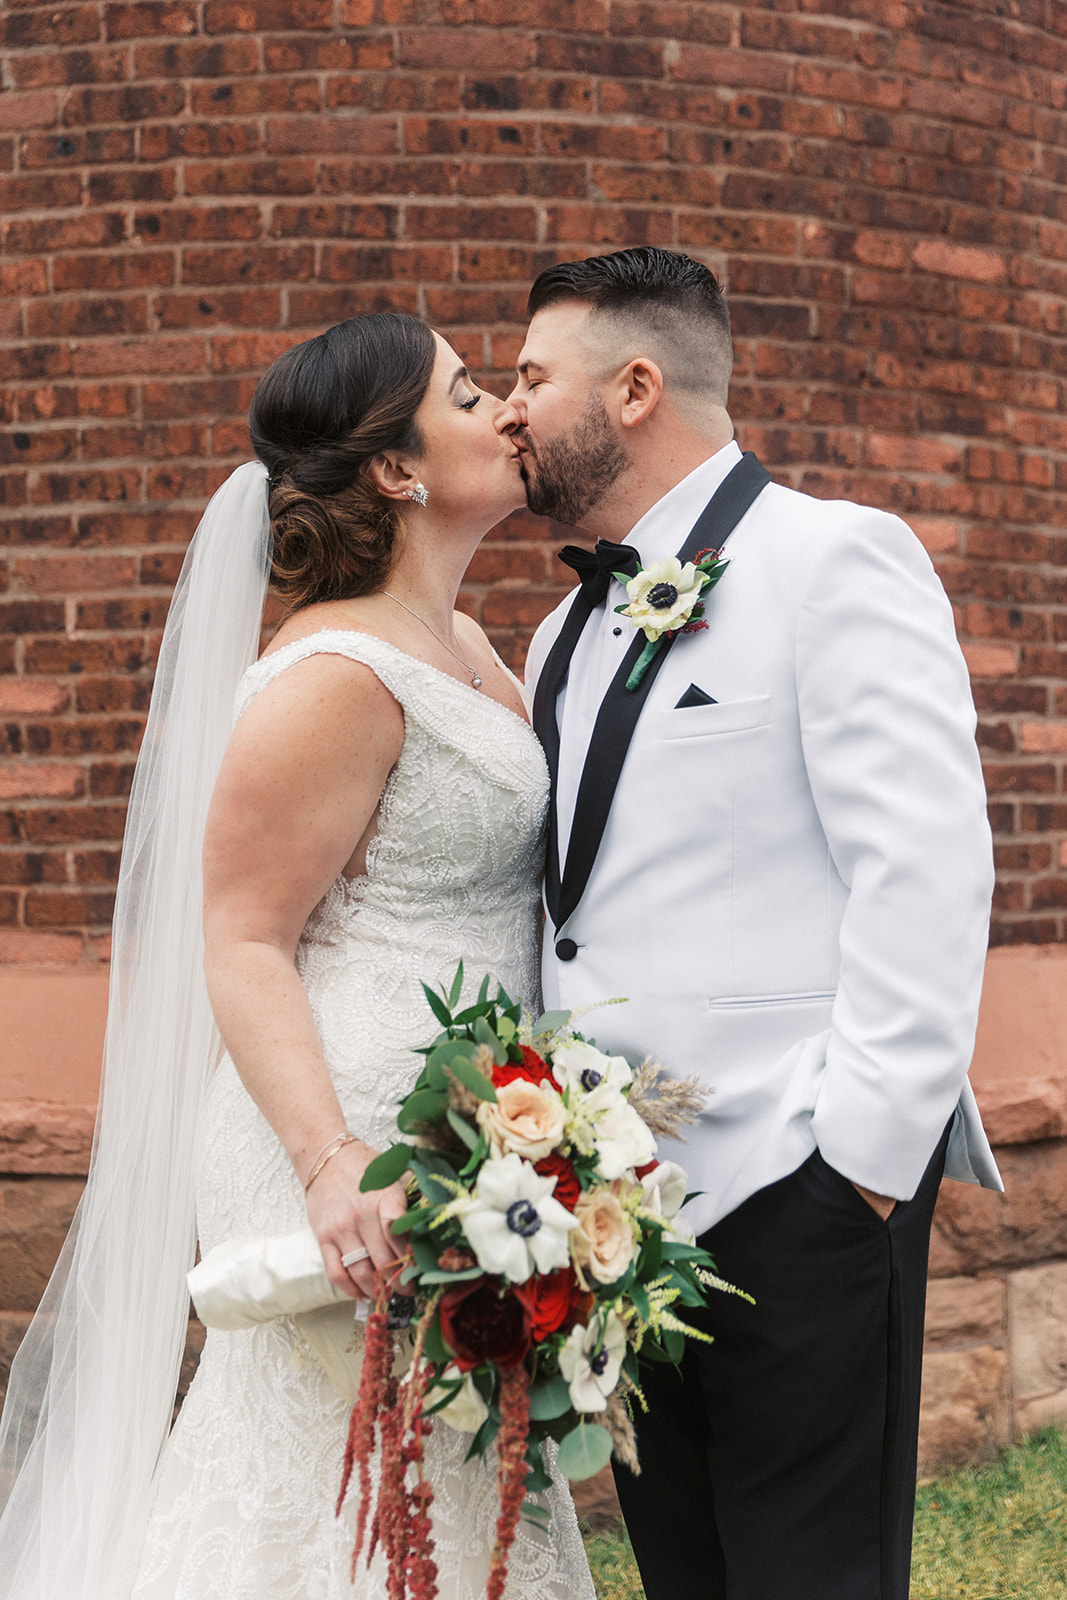 Newlyweds kiss in front of a brick wall at an Above Weddings